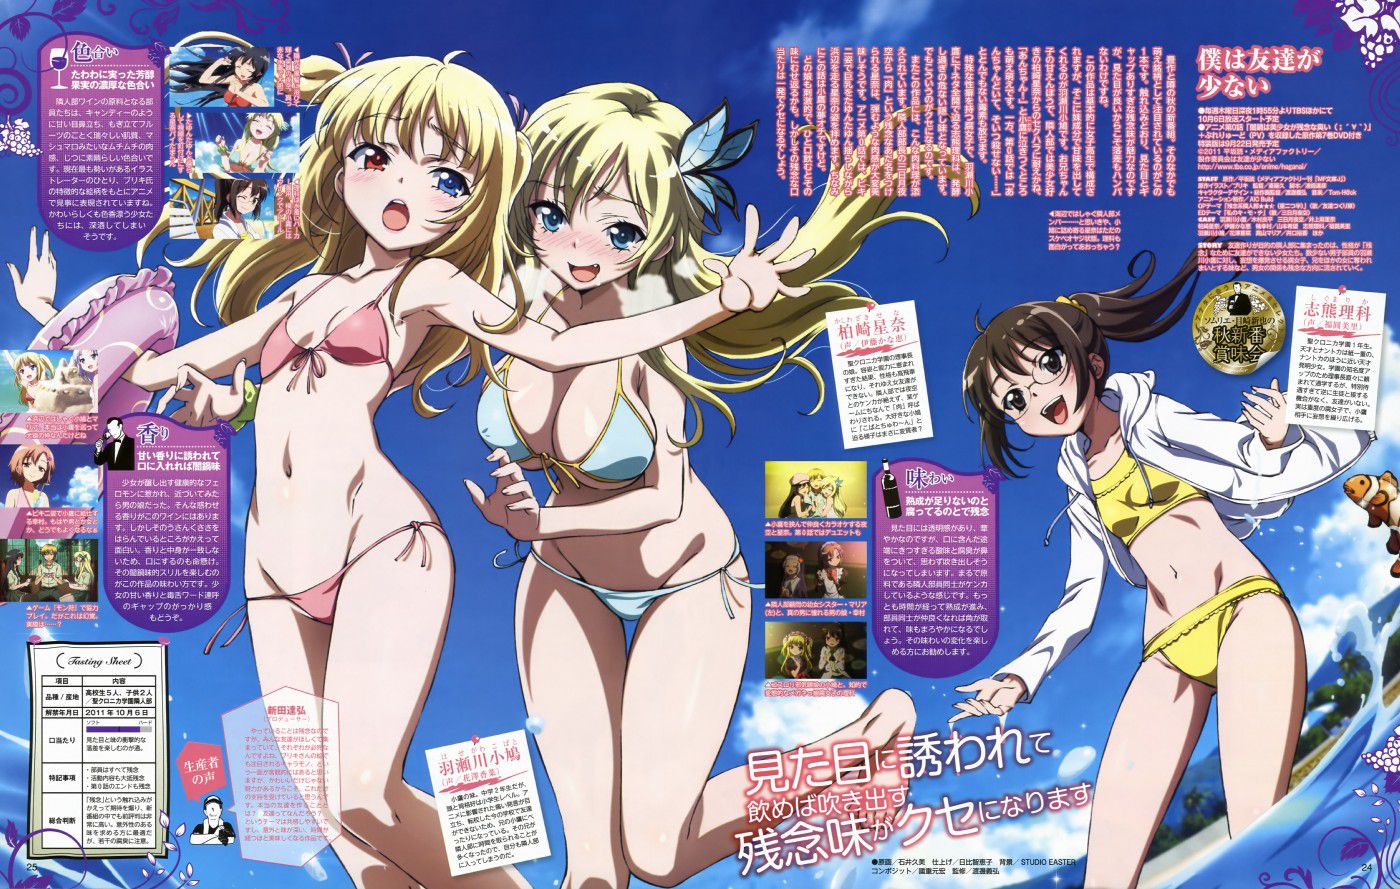 "Haganai" of meat together images to admire the Kashiwazaki Sena's dirty little schoolgirl body part2 12